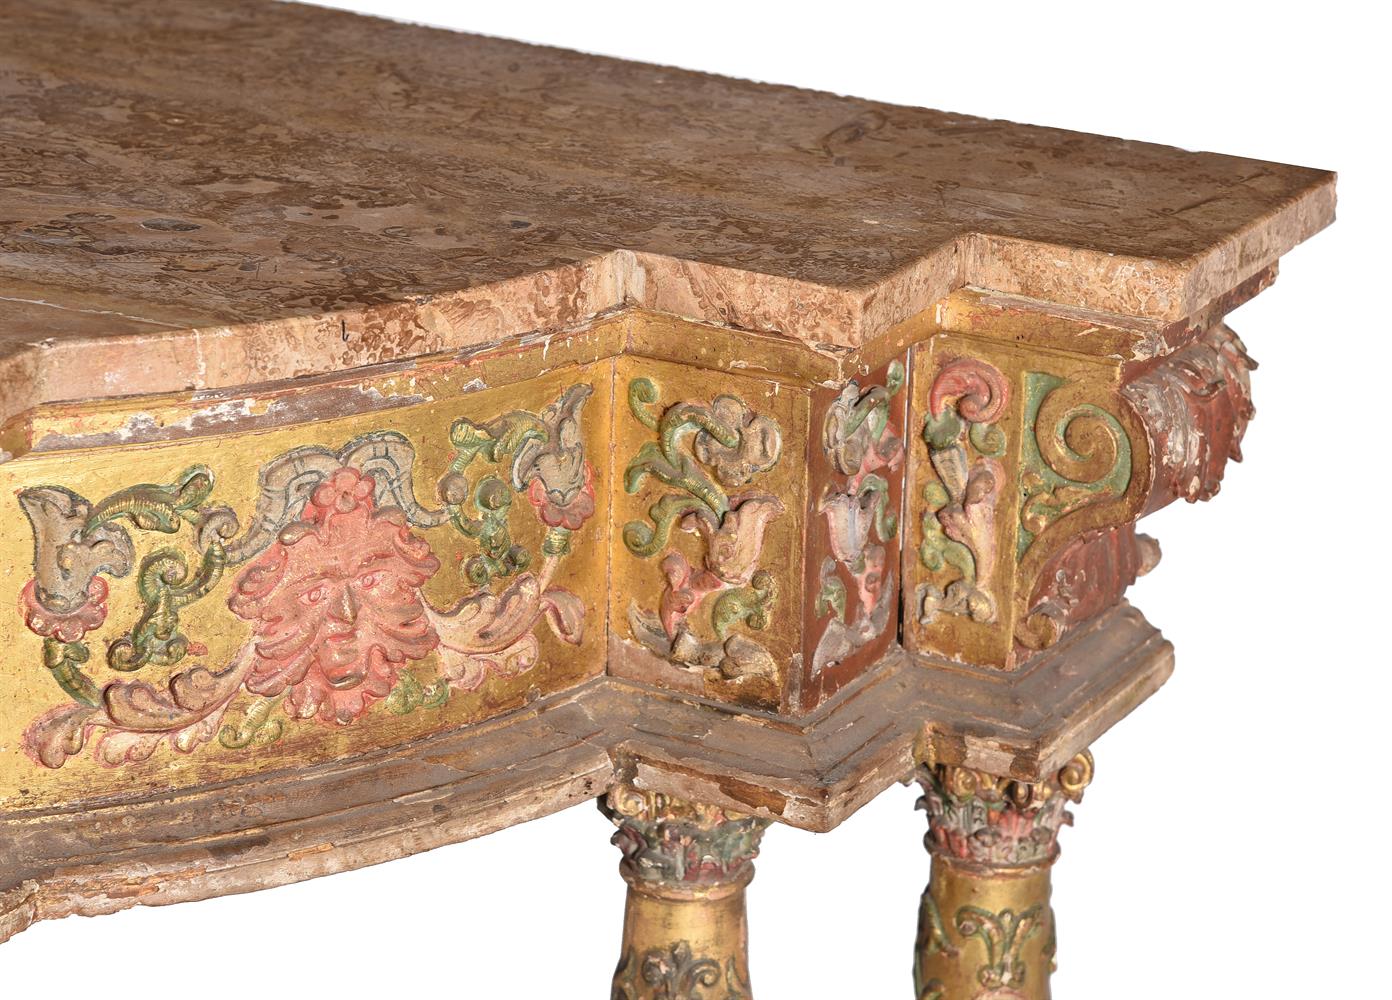 A SPANISH GILTWOOD AND POLYCHROME PAINTED SIDE OR ALTAR TABLE, LATE 17TH/EARLY 18TH CENTURY - Image 5 of 7